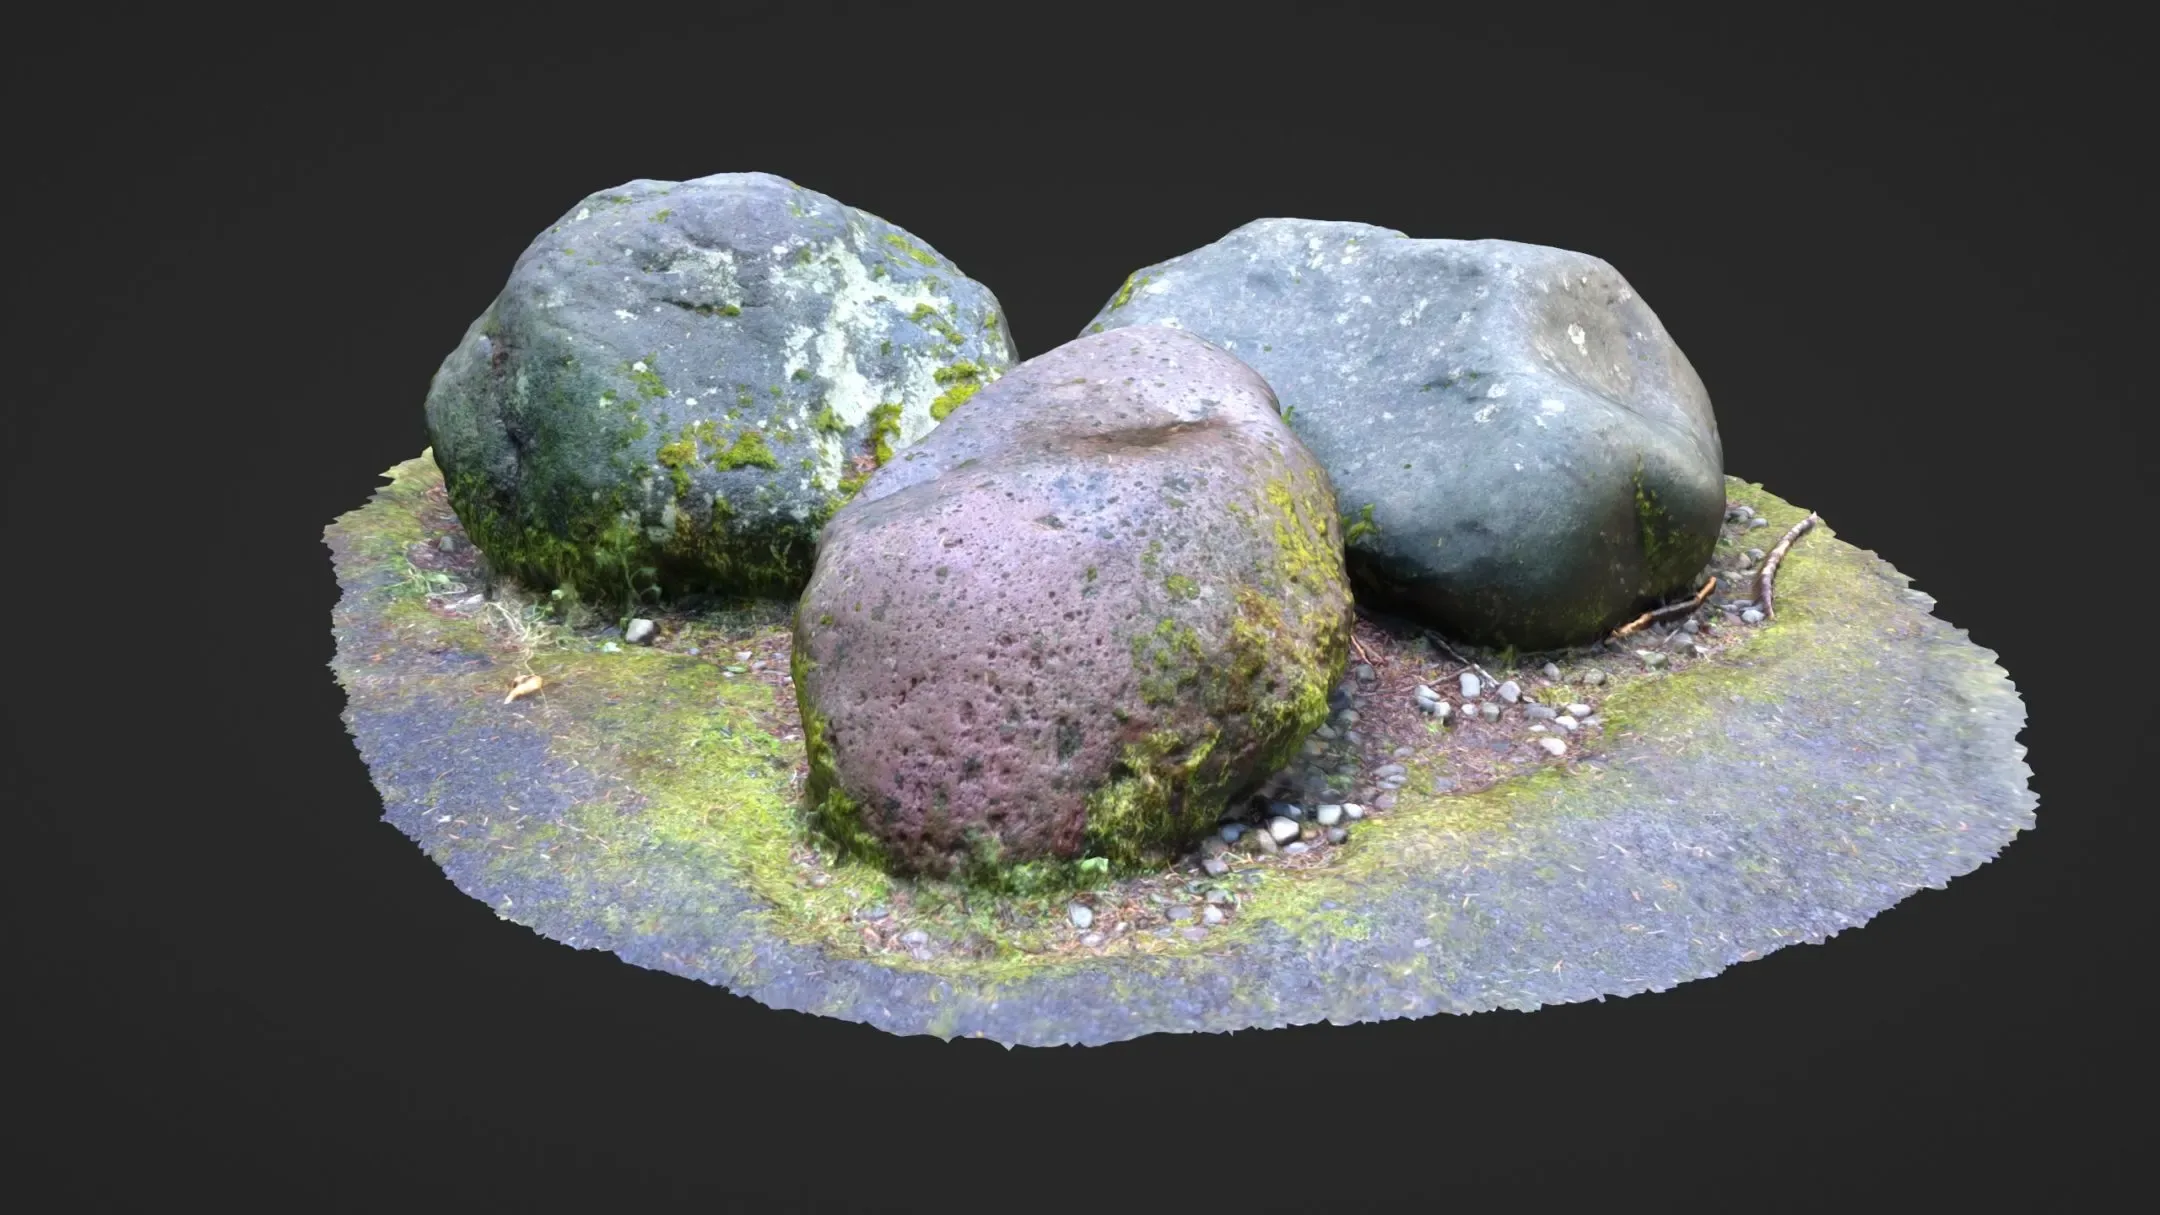 Photoscanned Nature (10 Assets)